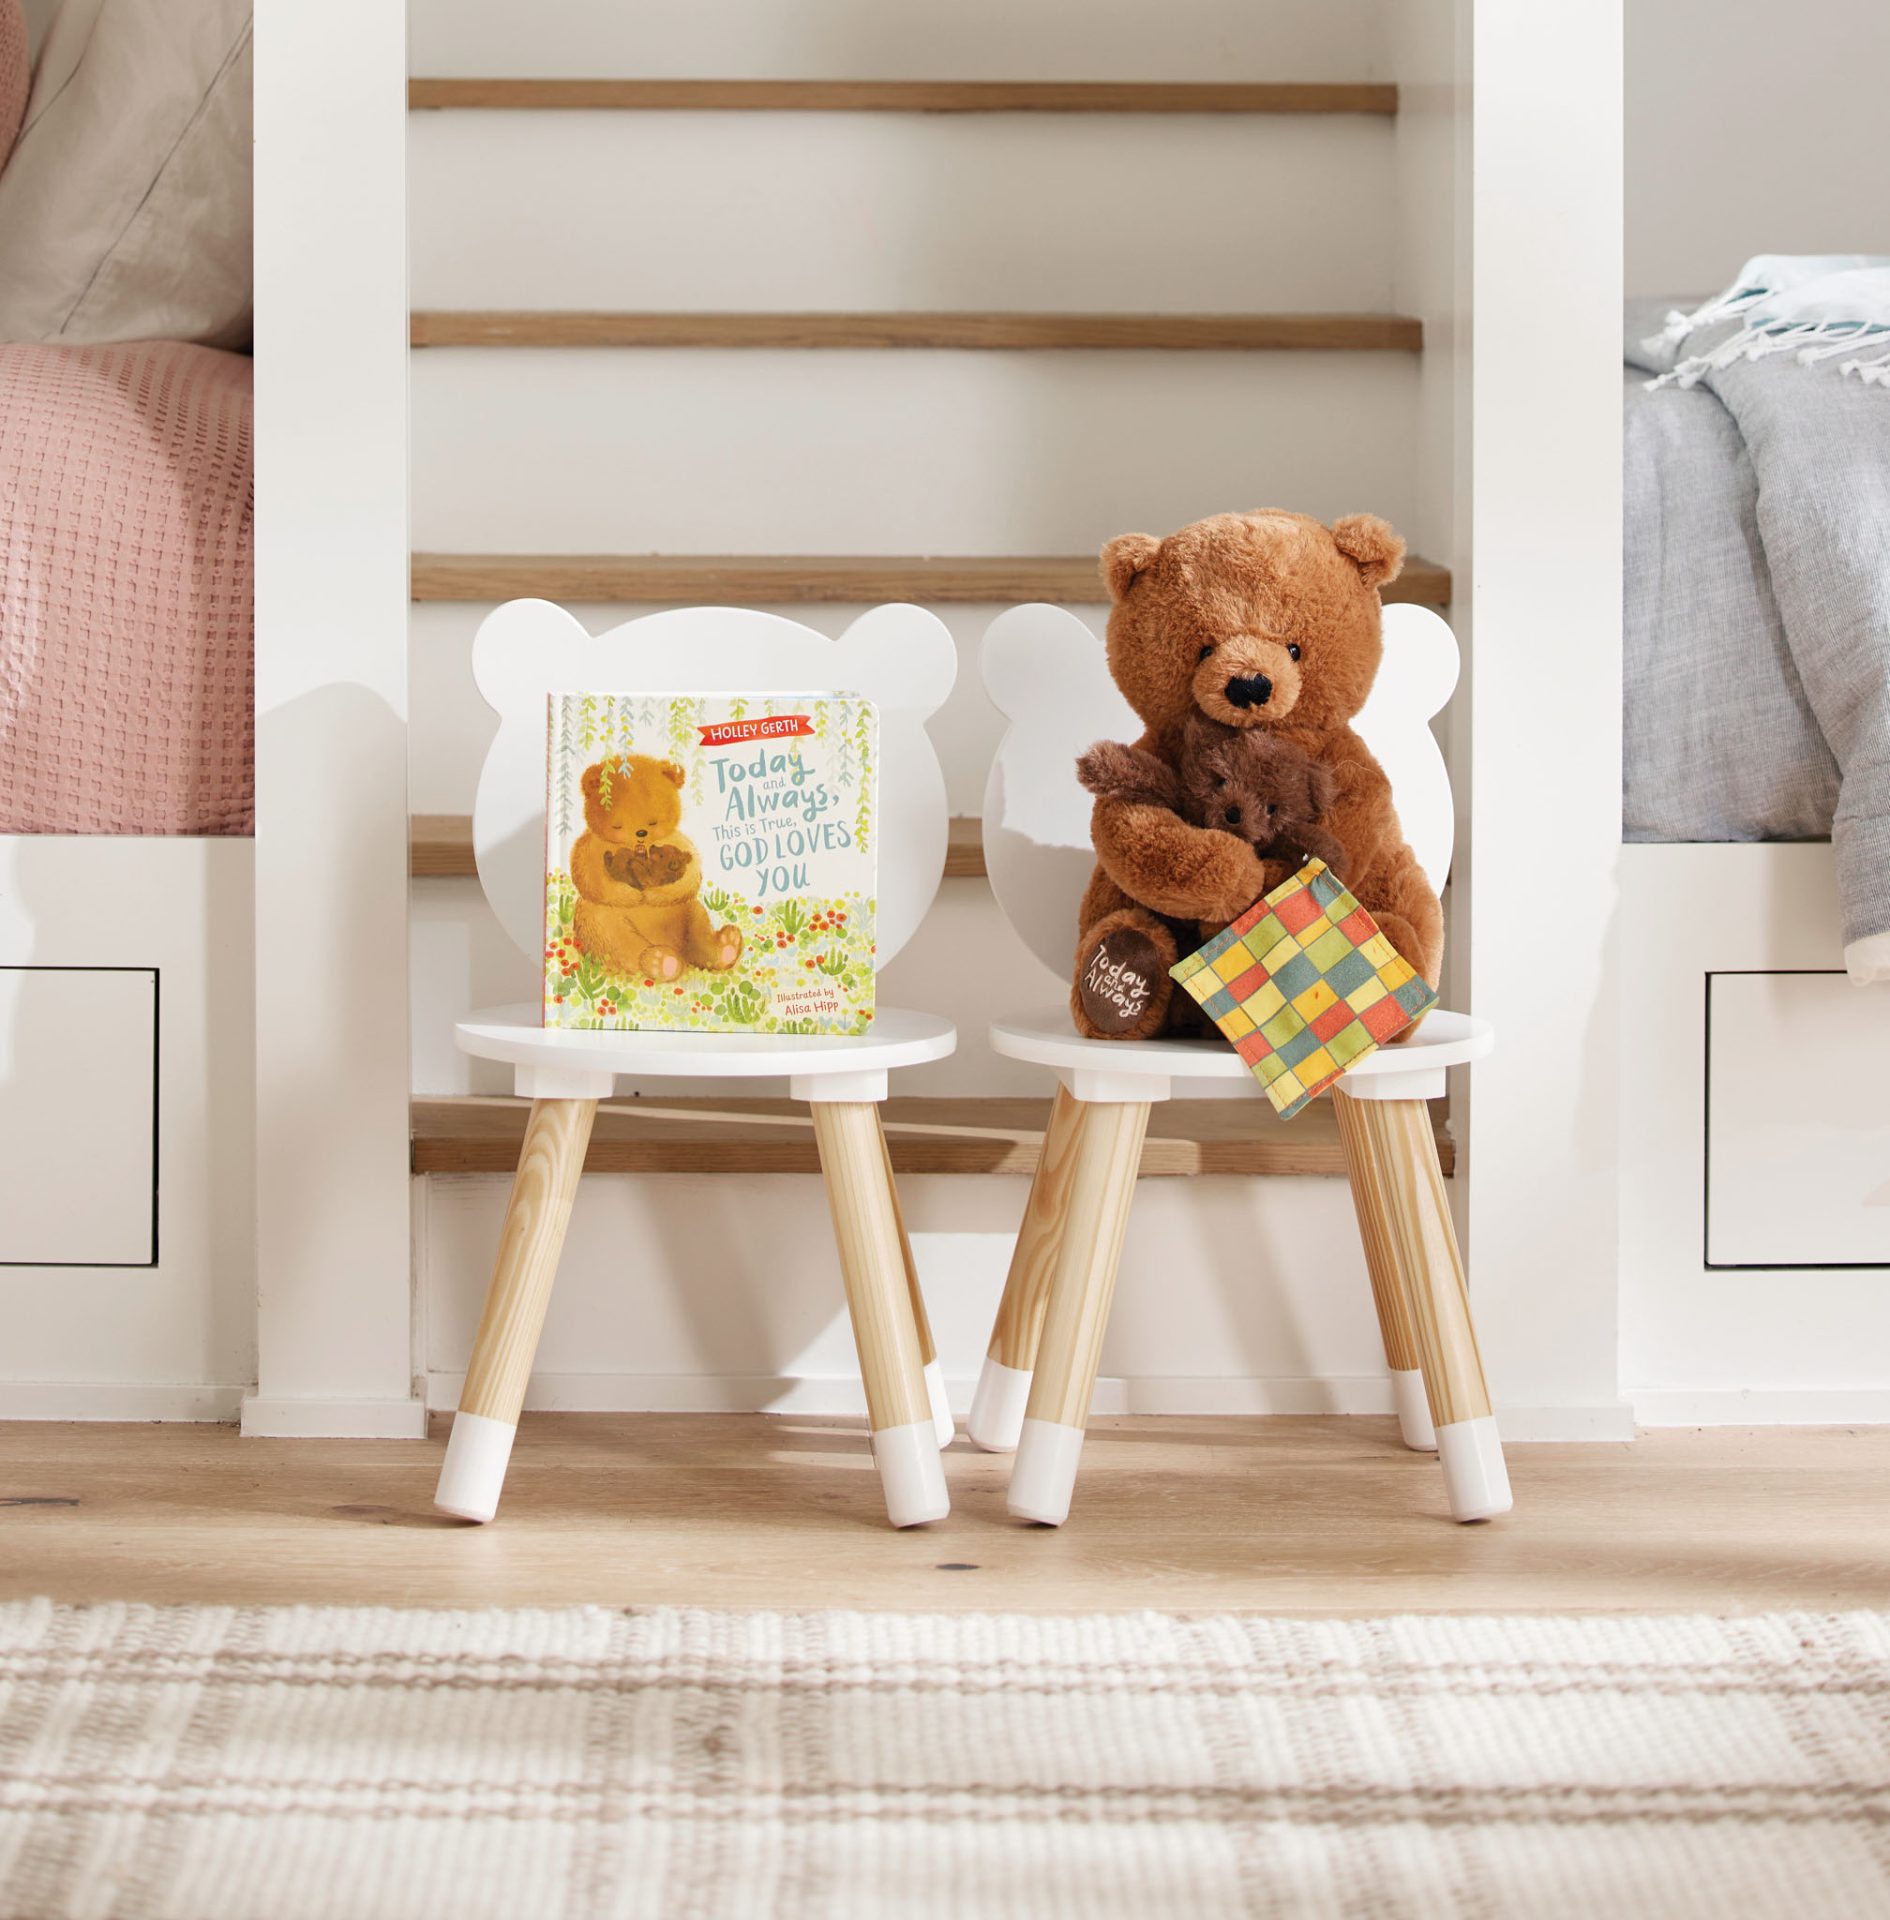 book and bear on little kid stools